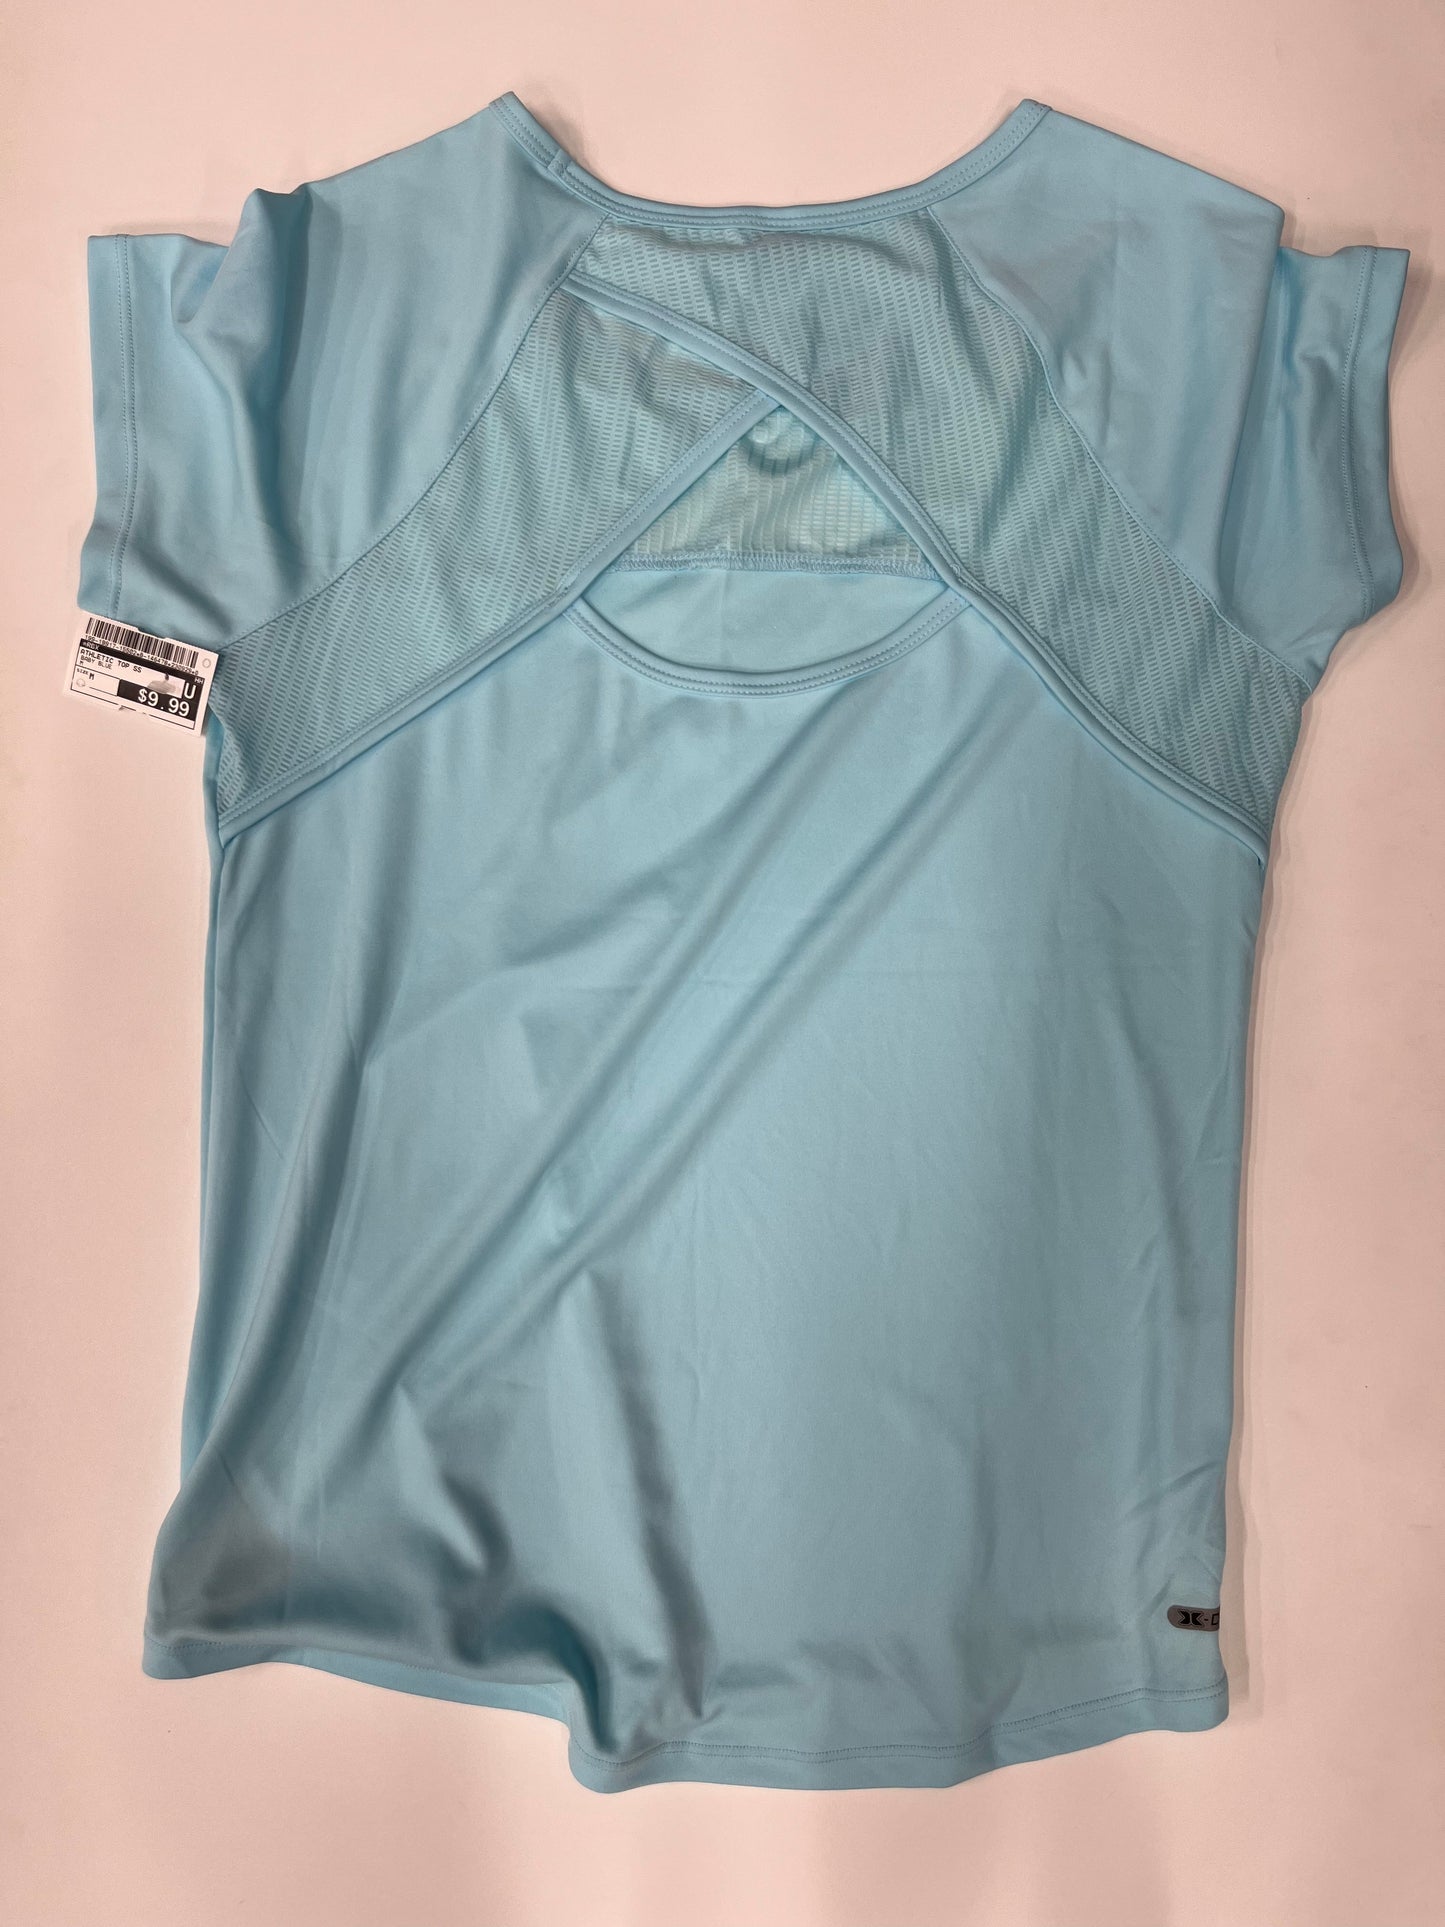 Athletic Top Short Sleeve By Rbx  Size: M